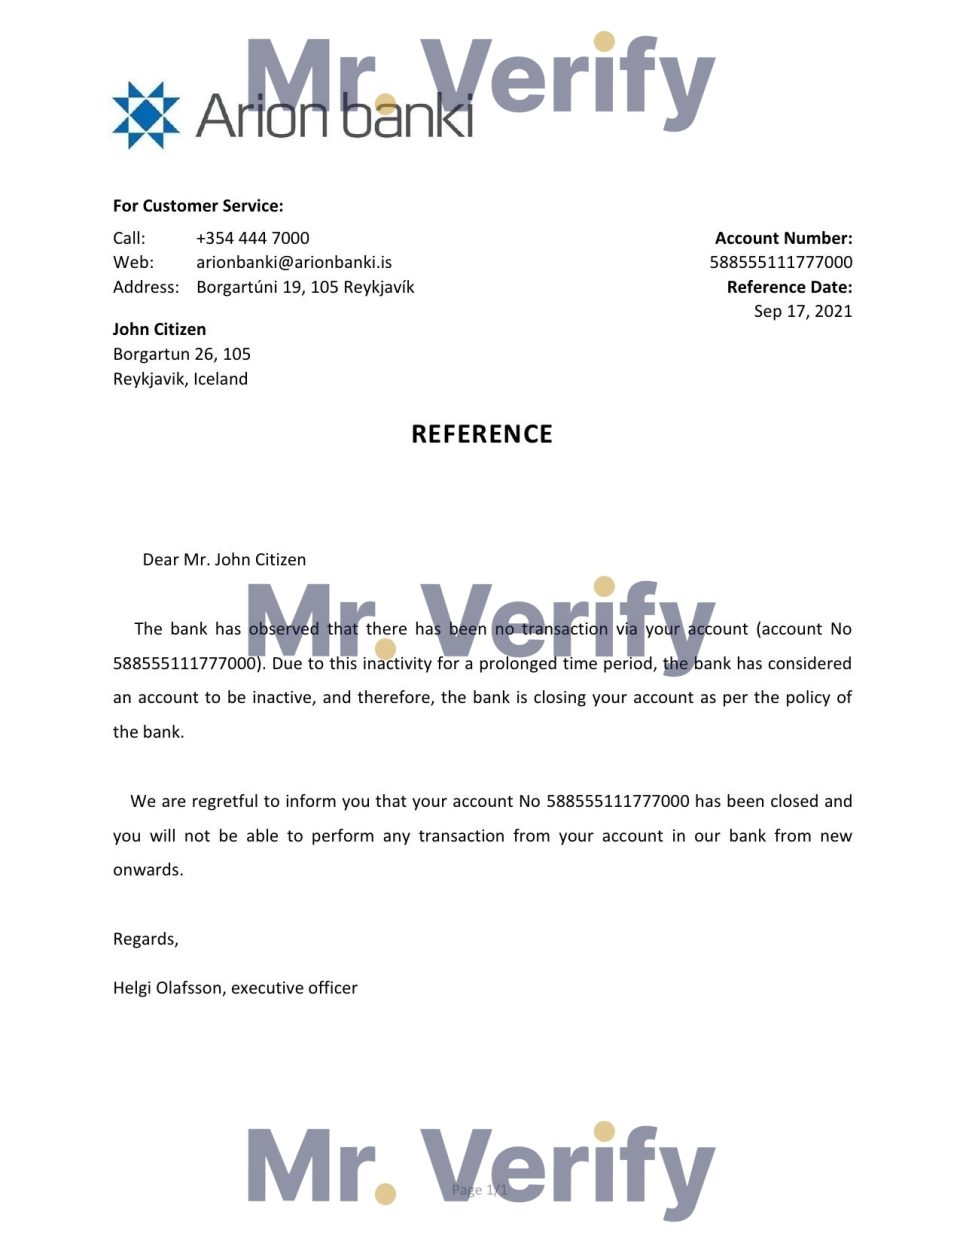 Download Iceland Arion Bank Reference Letter Templates | Editable Word